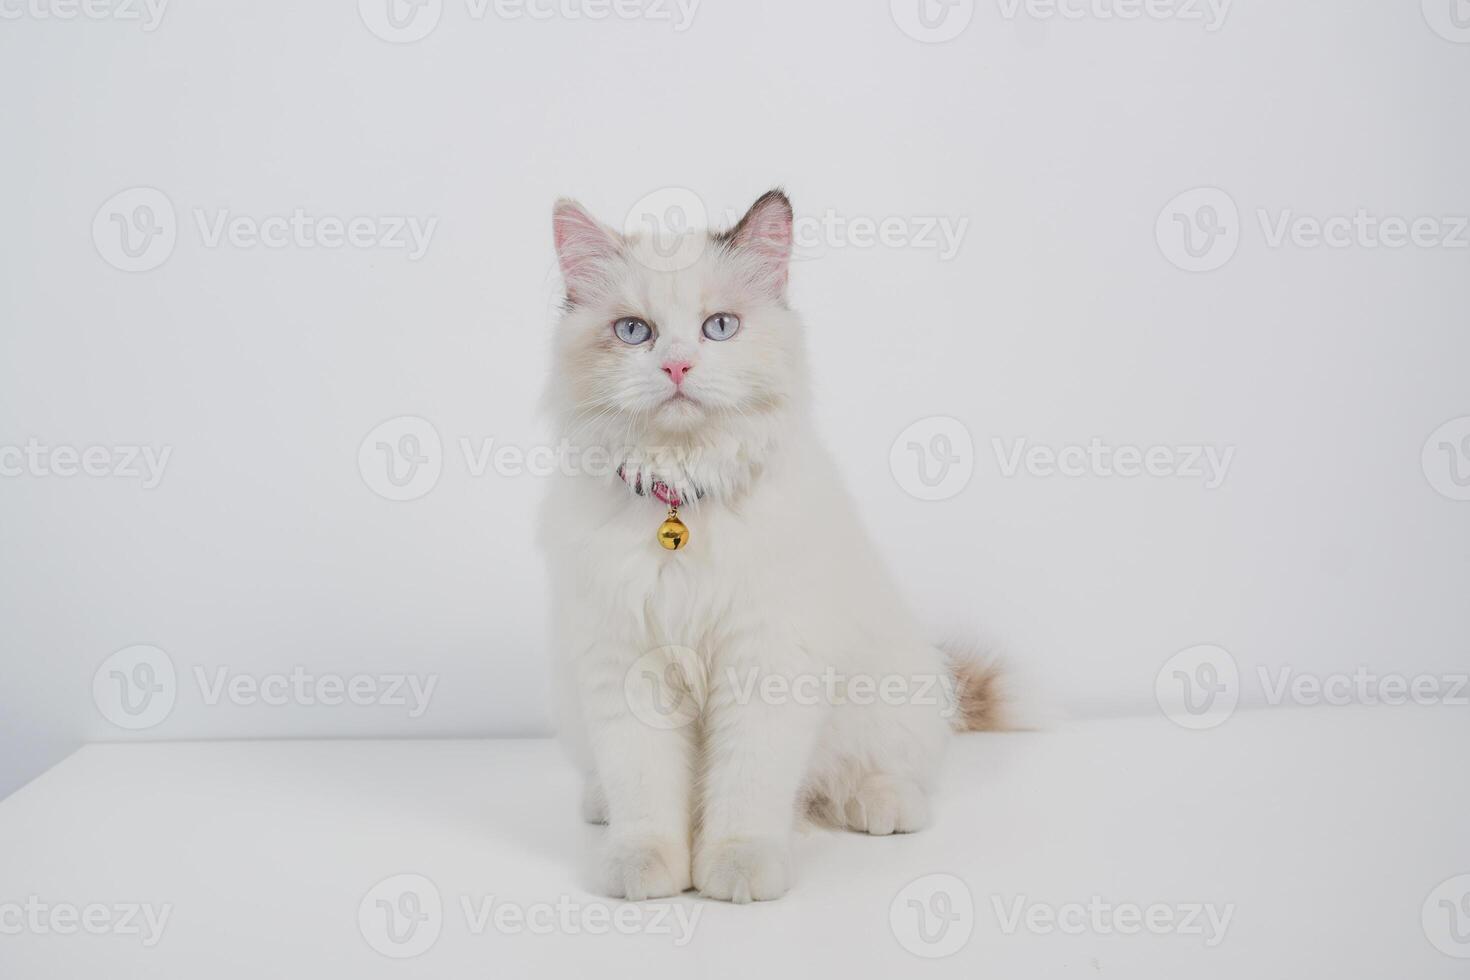 Studio portrait of a sitting ragdoll cat looking forward against a white background photo